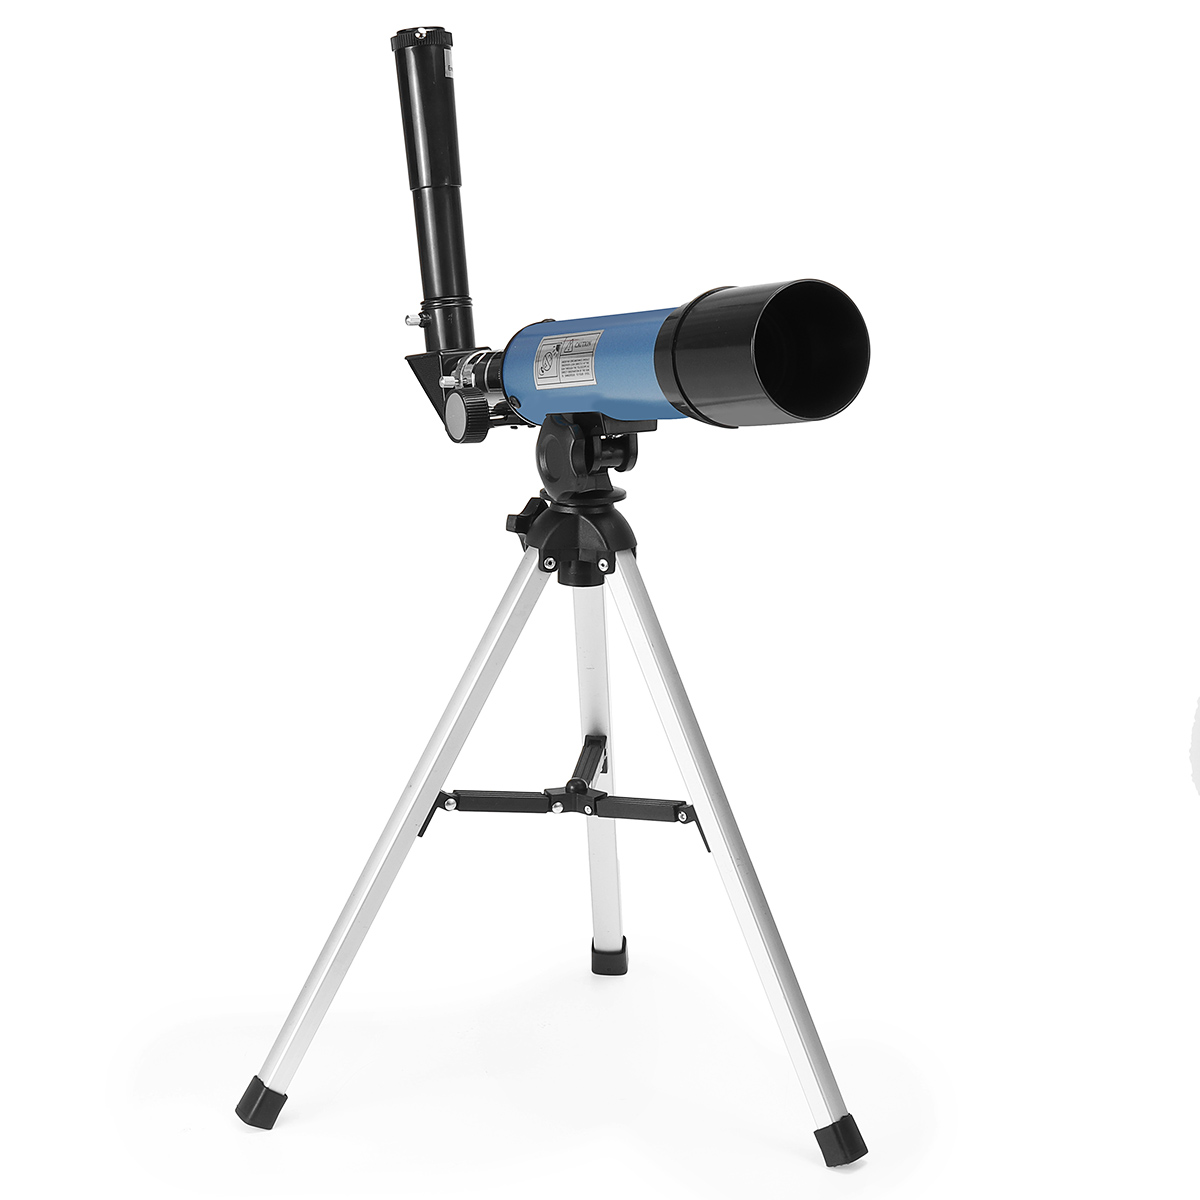 90x-Magnification-Astronomical-Telescope-Clear-Image-with-Remote-Control-and-Camera-Rod-for-Observe--1851121-4